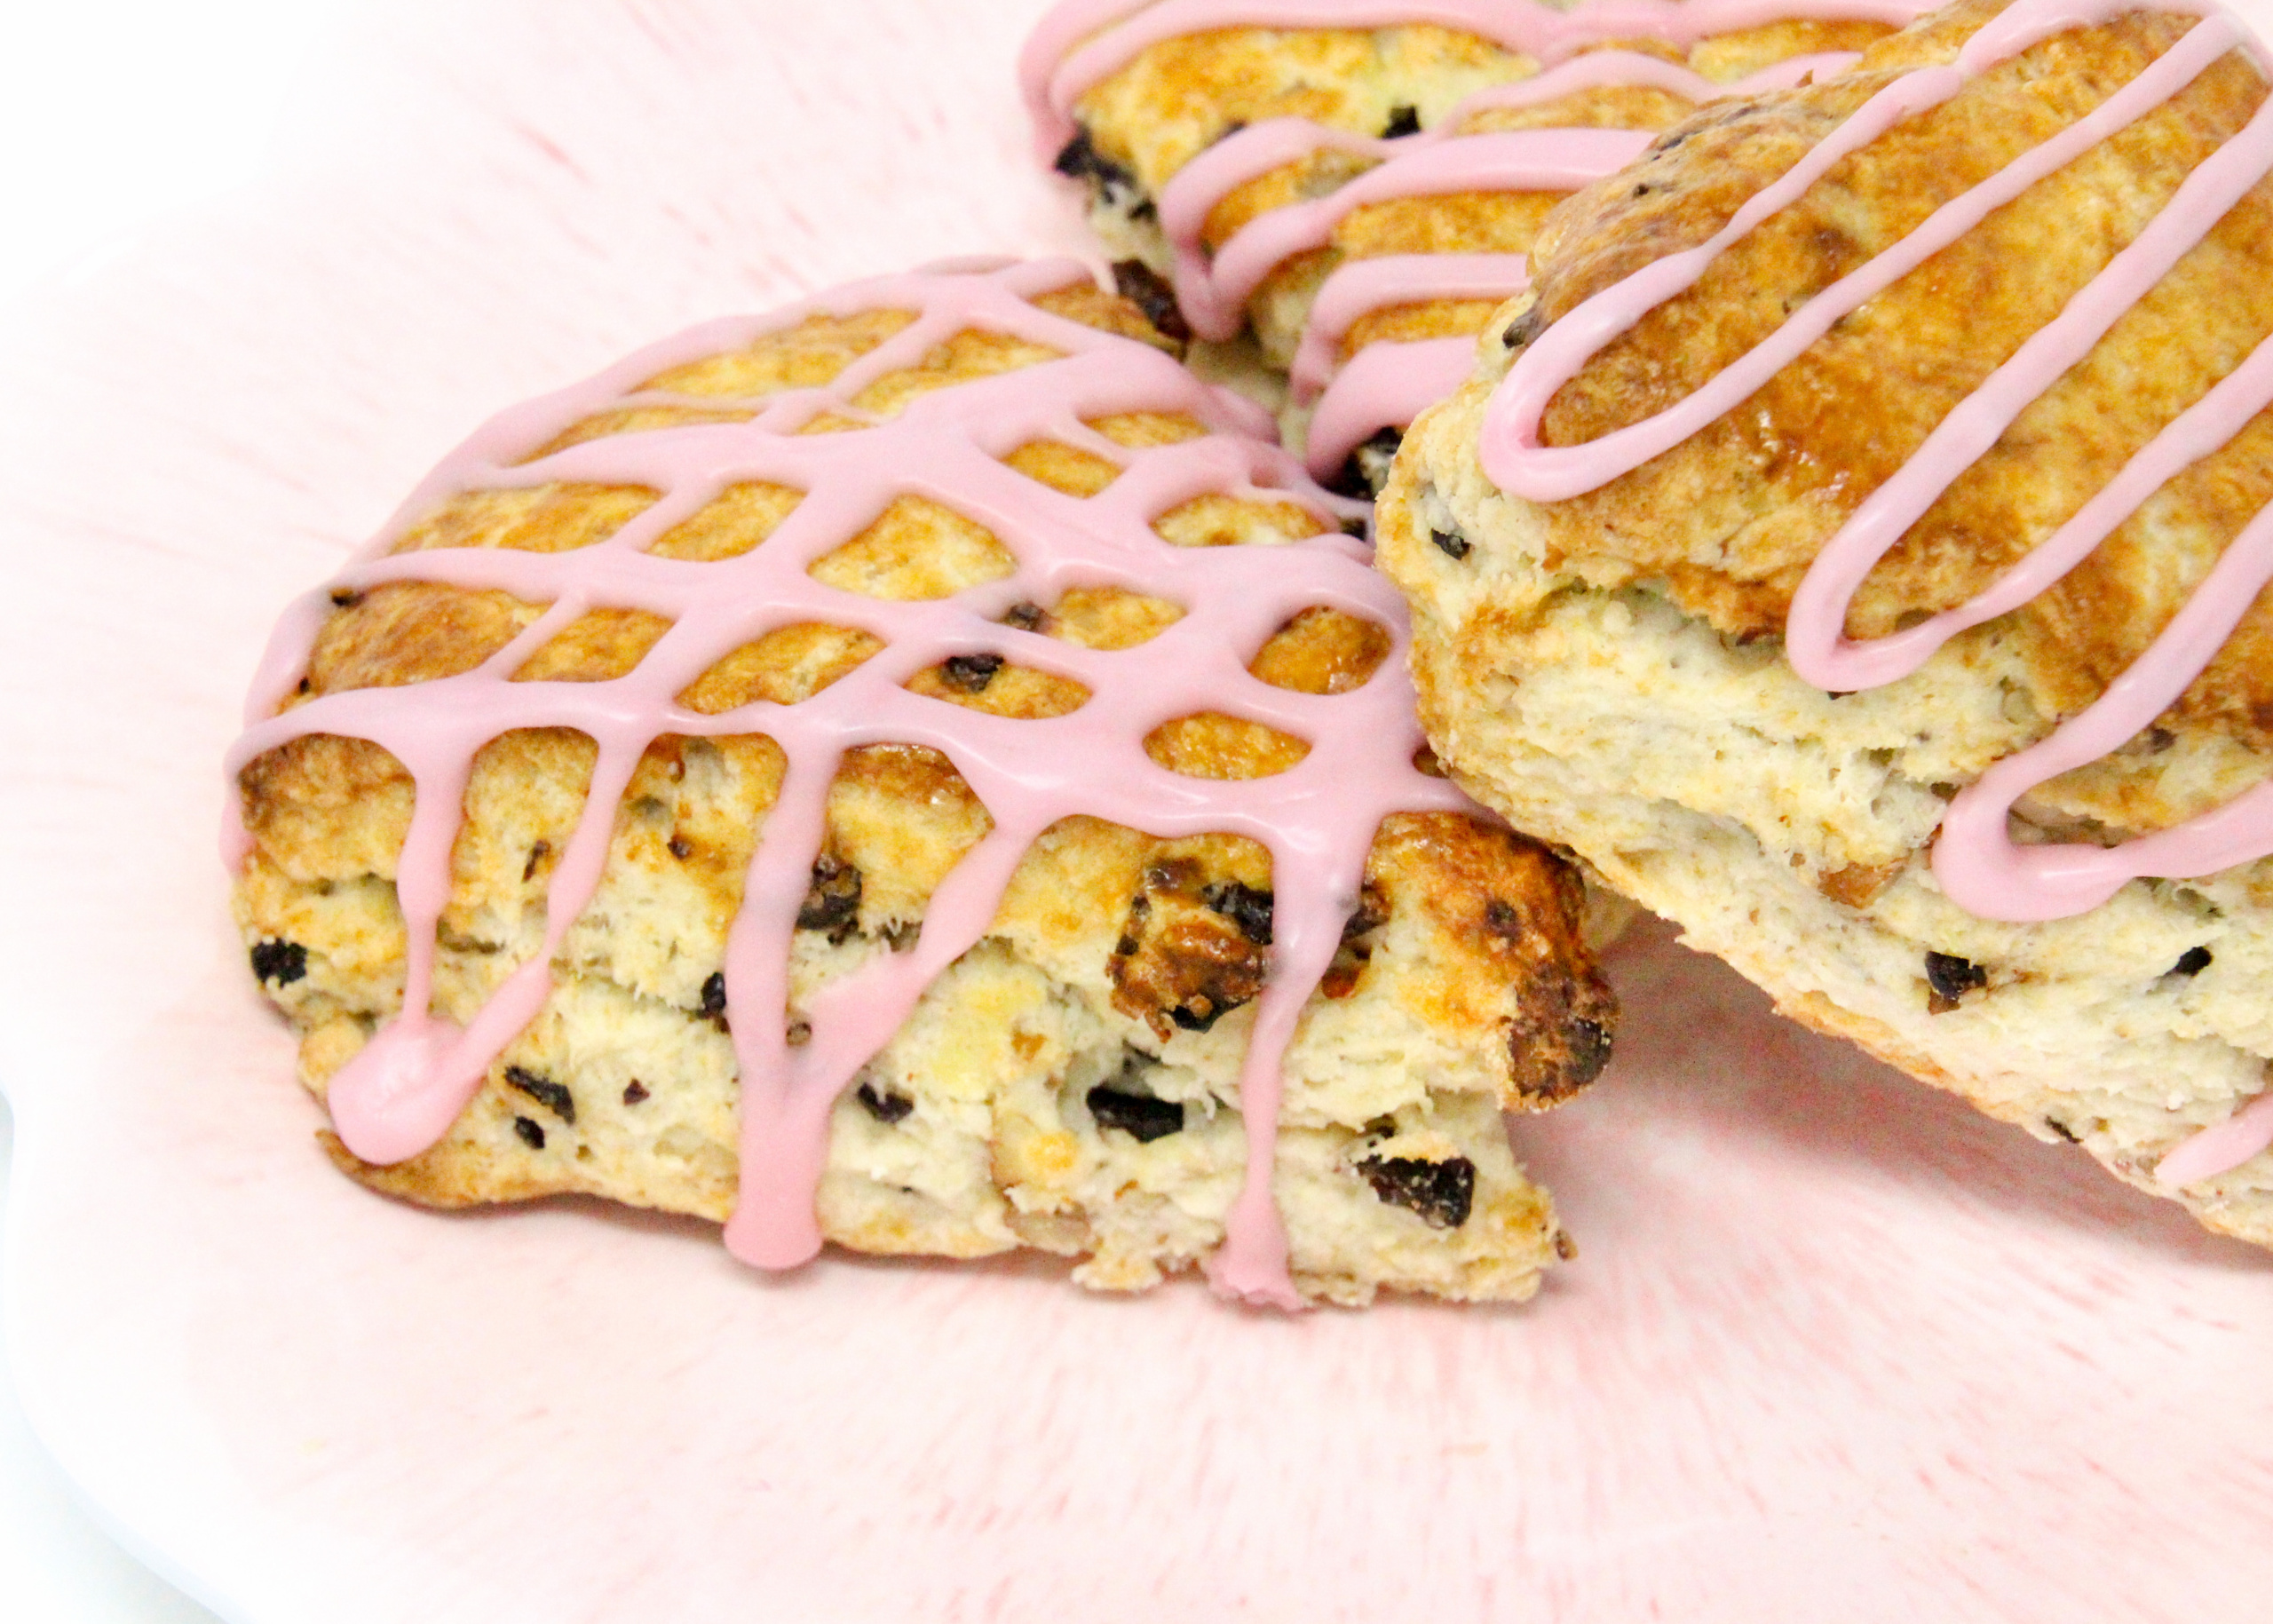 Whitney's Famous Cherry Scones are flaky pastry, studded with plump dried cherries and toasted pecans. A drizzle of cherry juice glaze makes these even more delicious. Recipe shared with permission granted by Darci Hannah, author of Cherry Scones & Broken Bones. 